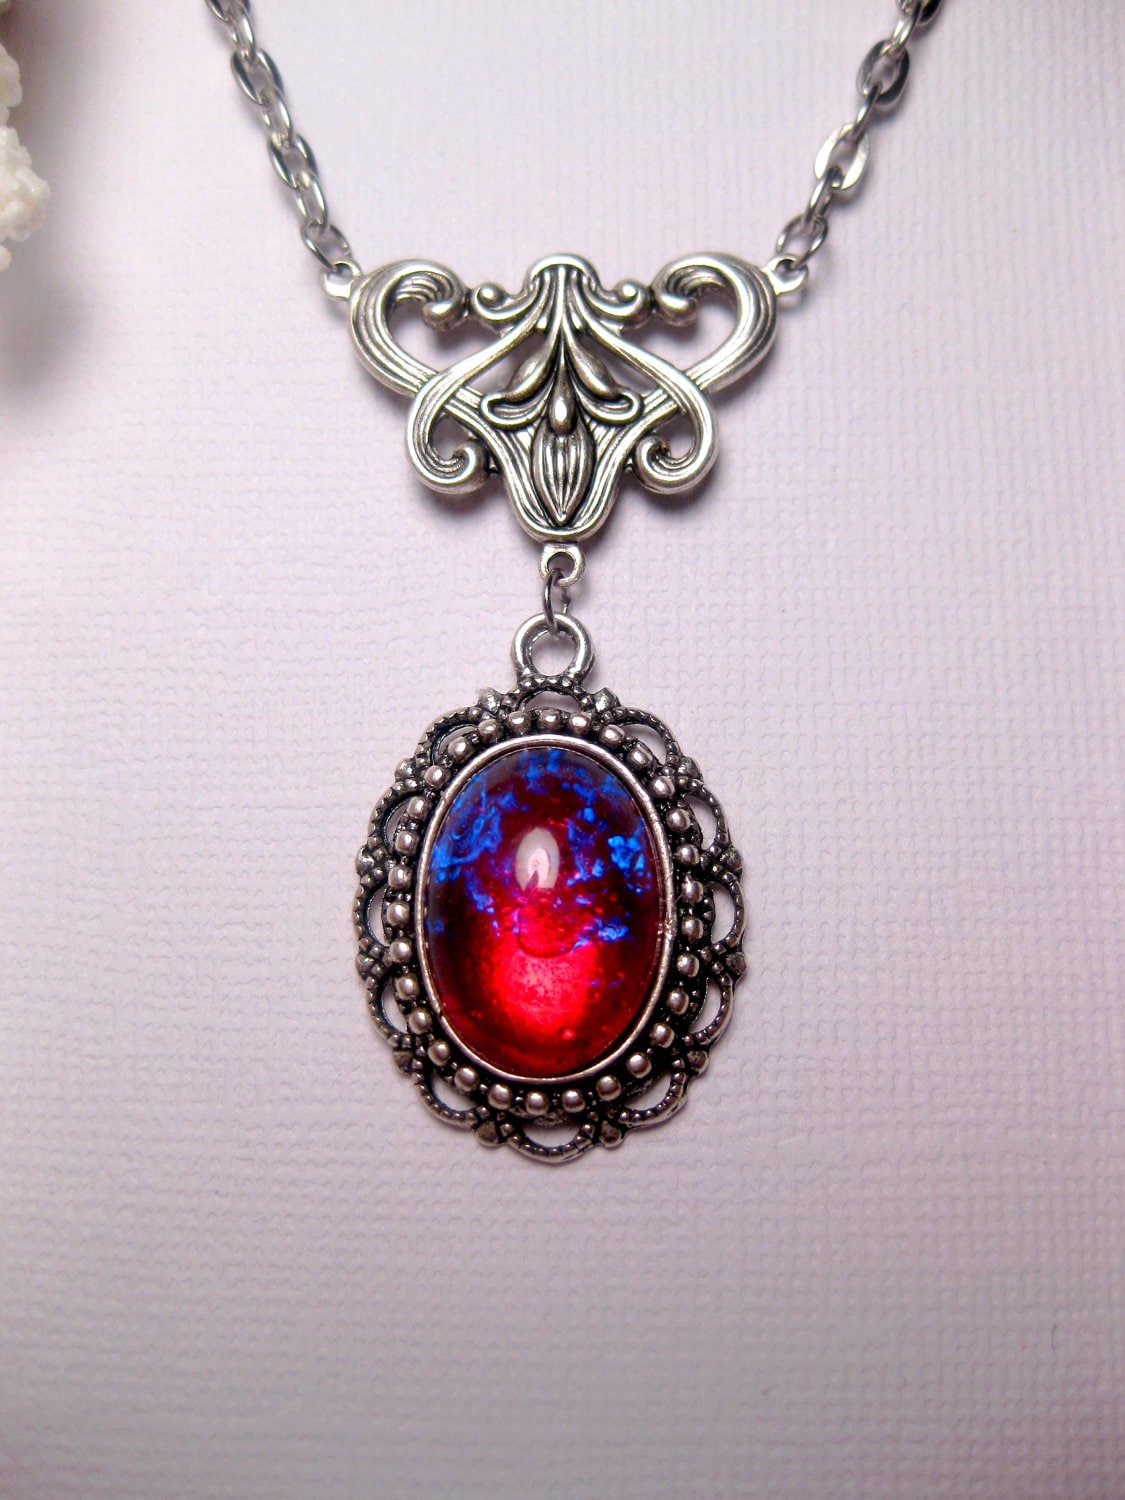 Dragon's Breath Necklace Fire Opal Necklace Victorian